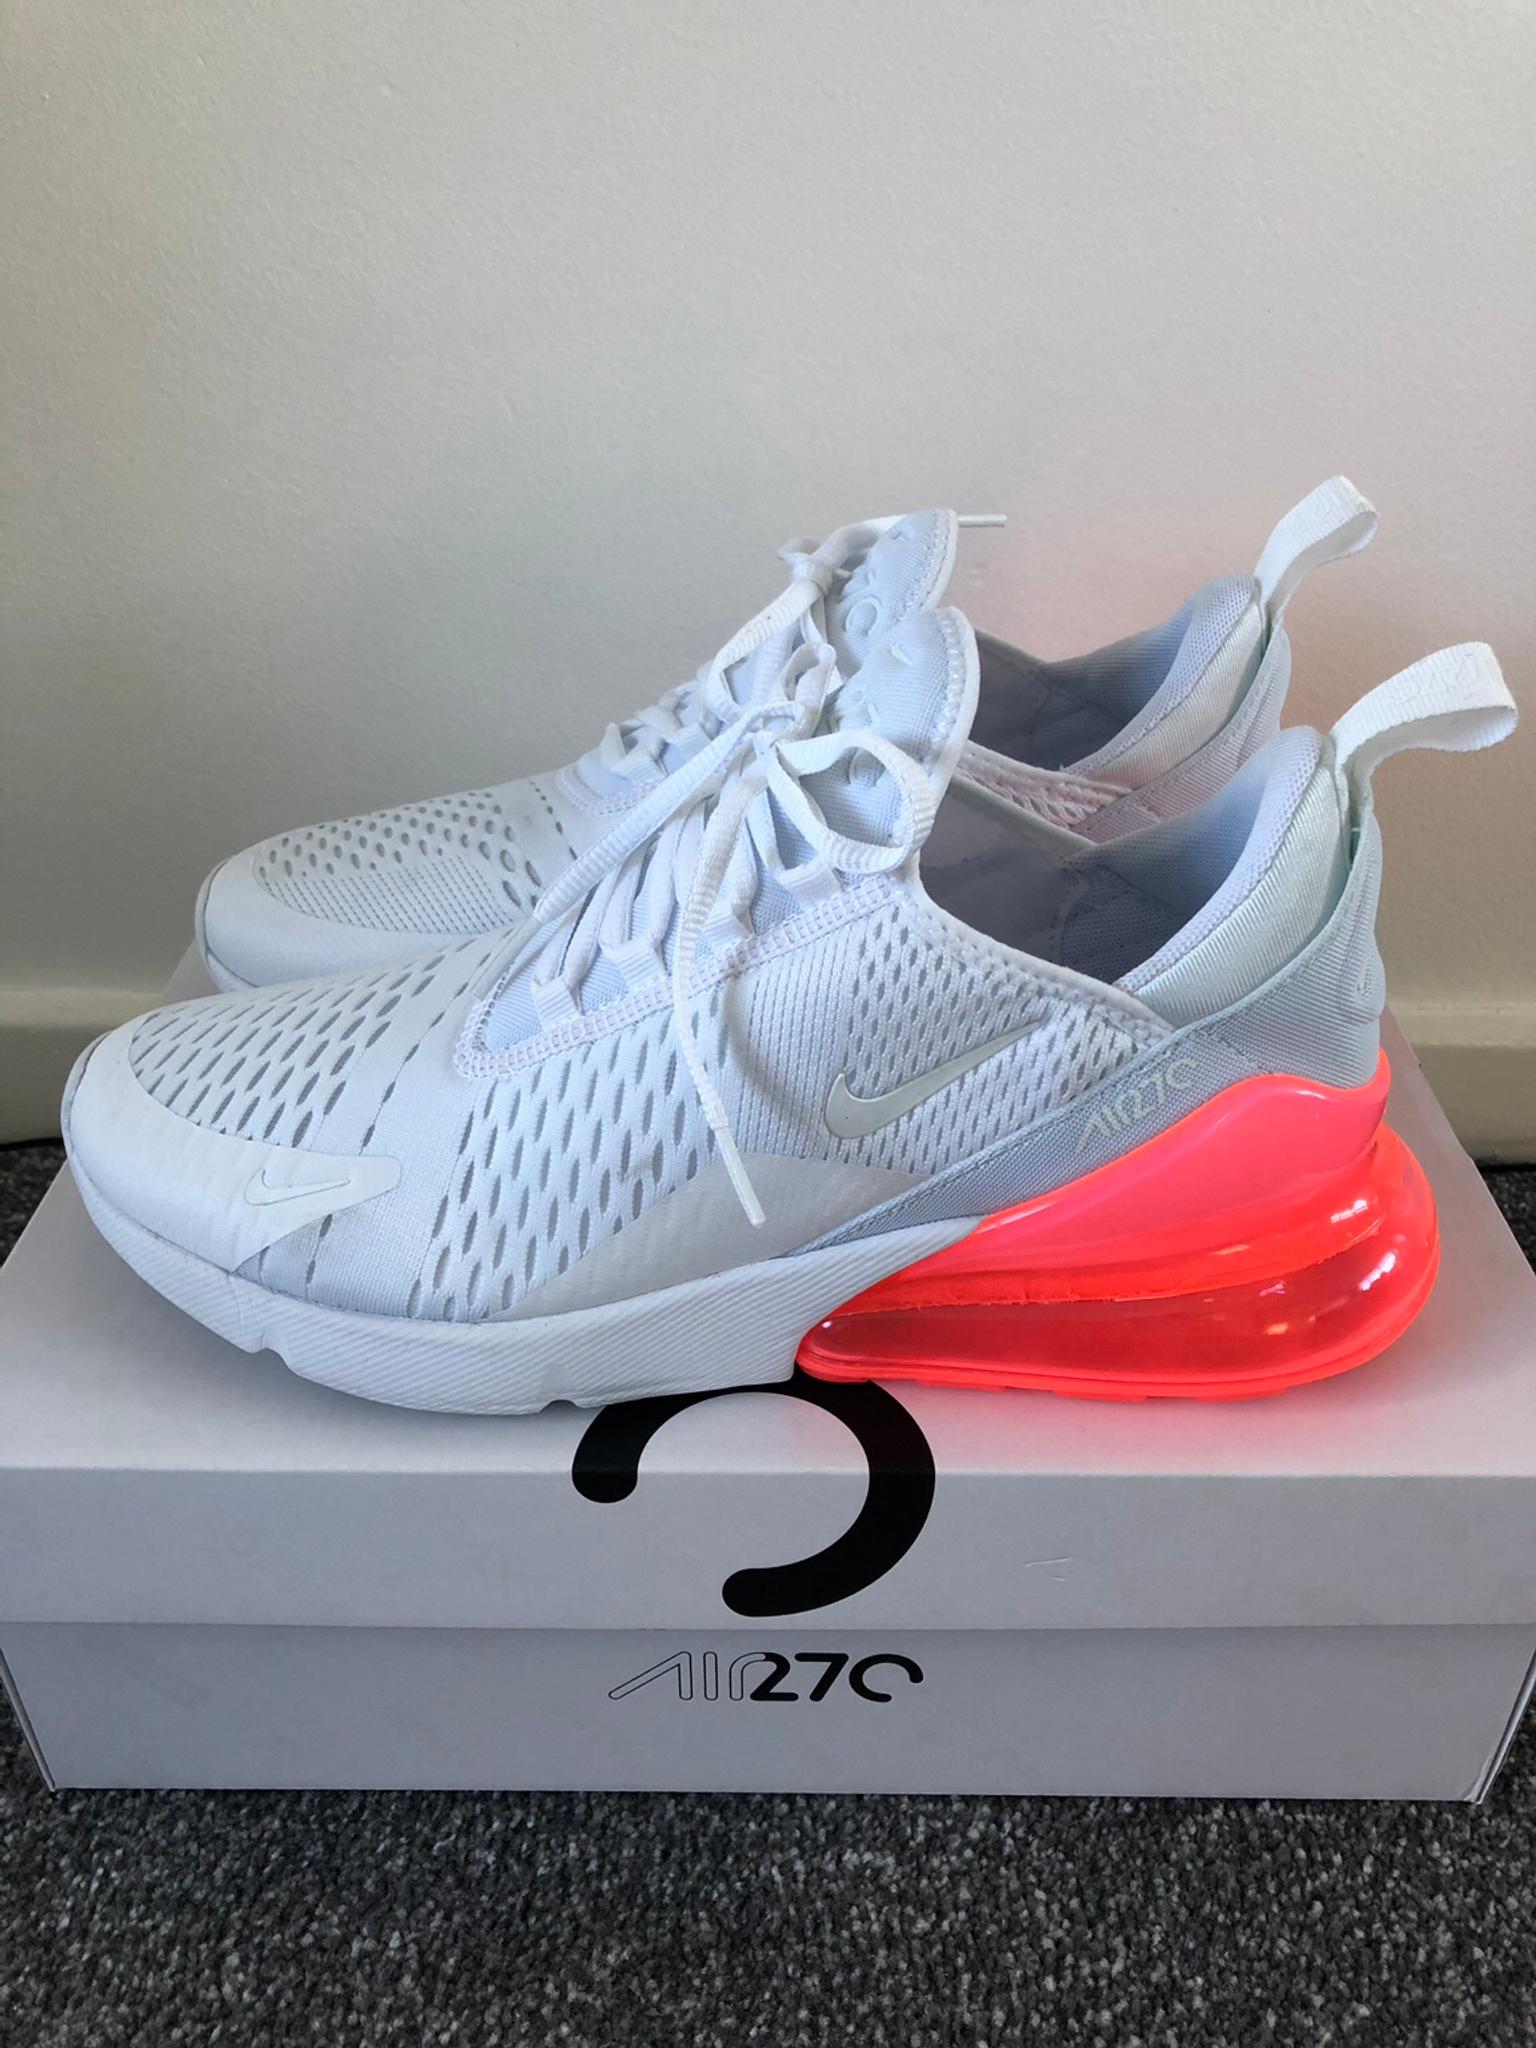 nike 270 edition limited